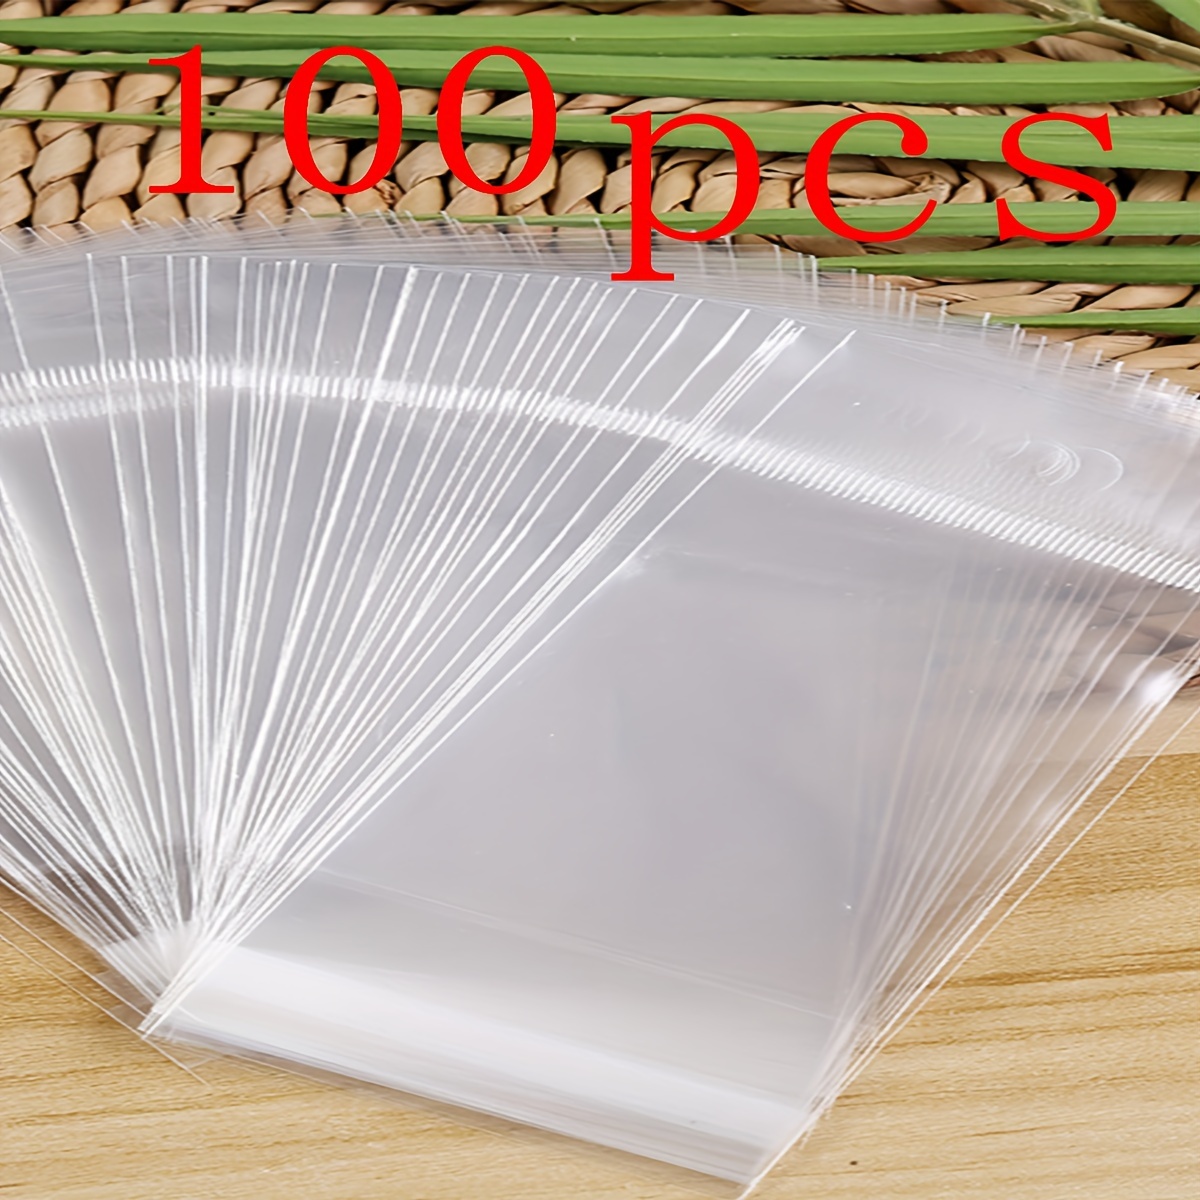 CLEAR TRANSPARENT OPP PLASTIC BAG PACKAGING (NO HOLE) SMALL- 200PCS